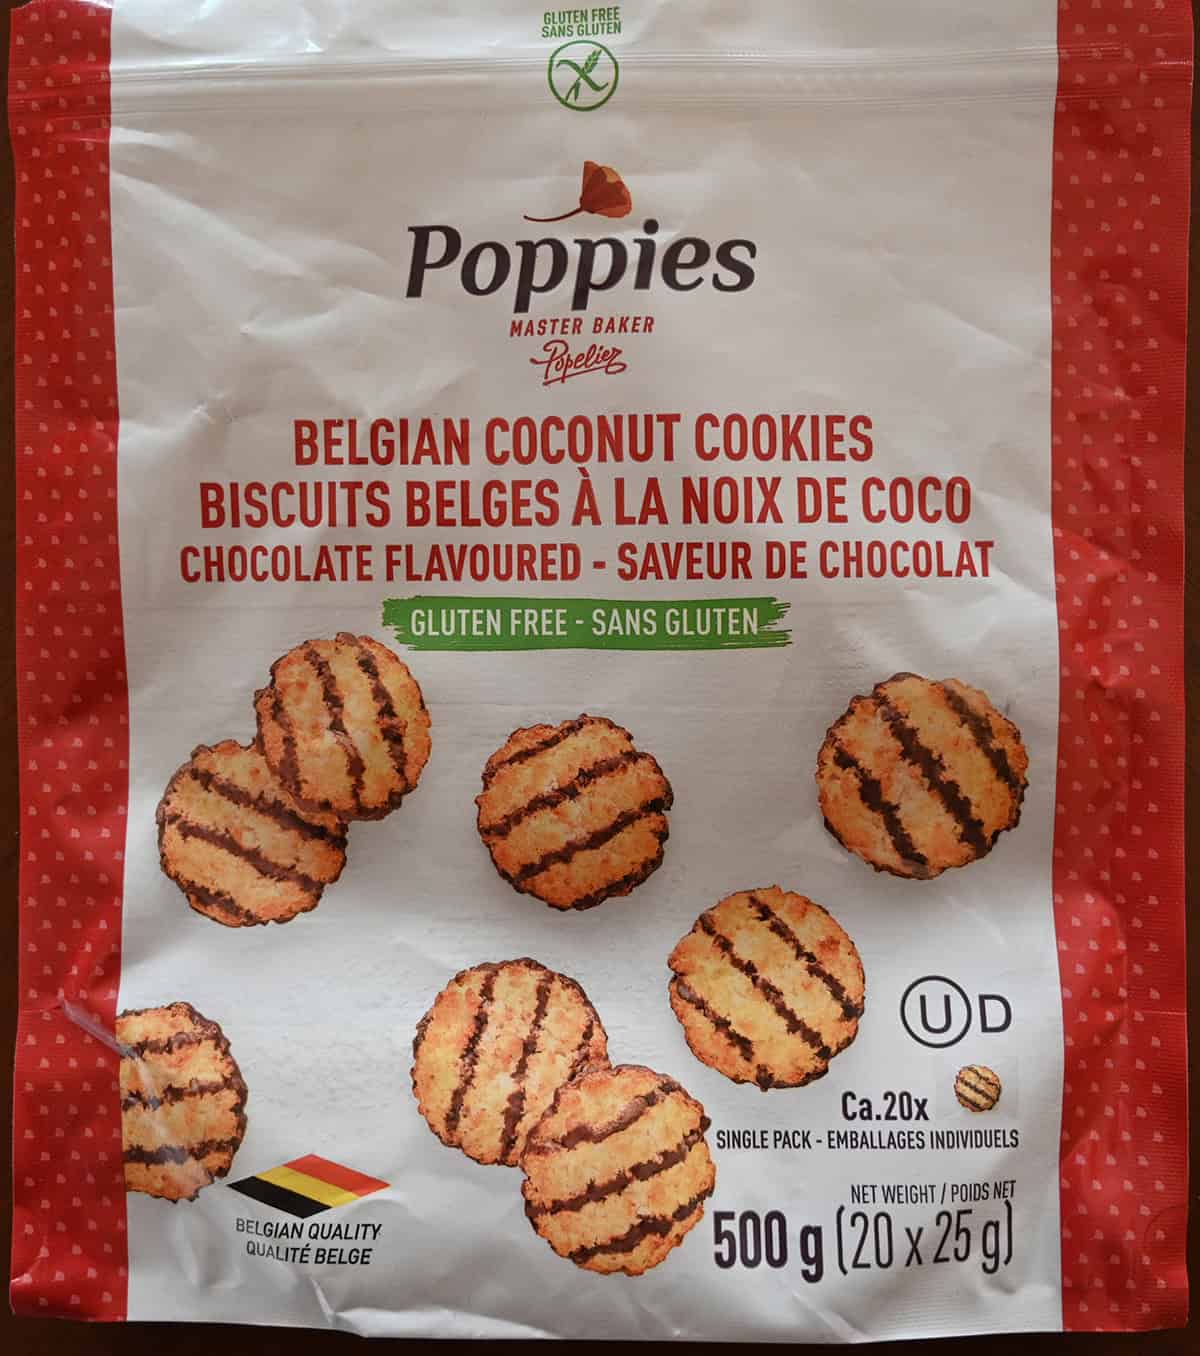 Closeup image of the front of the Poppies bag showing the weight of the bag and that the cookies are gluten-free. 